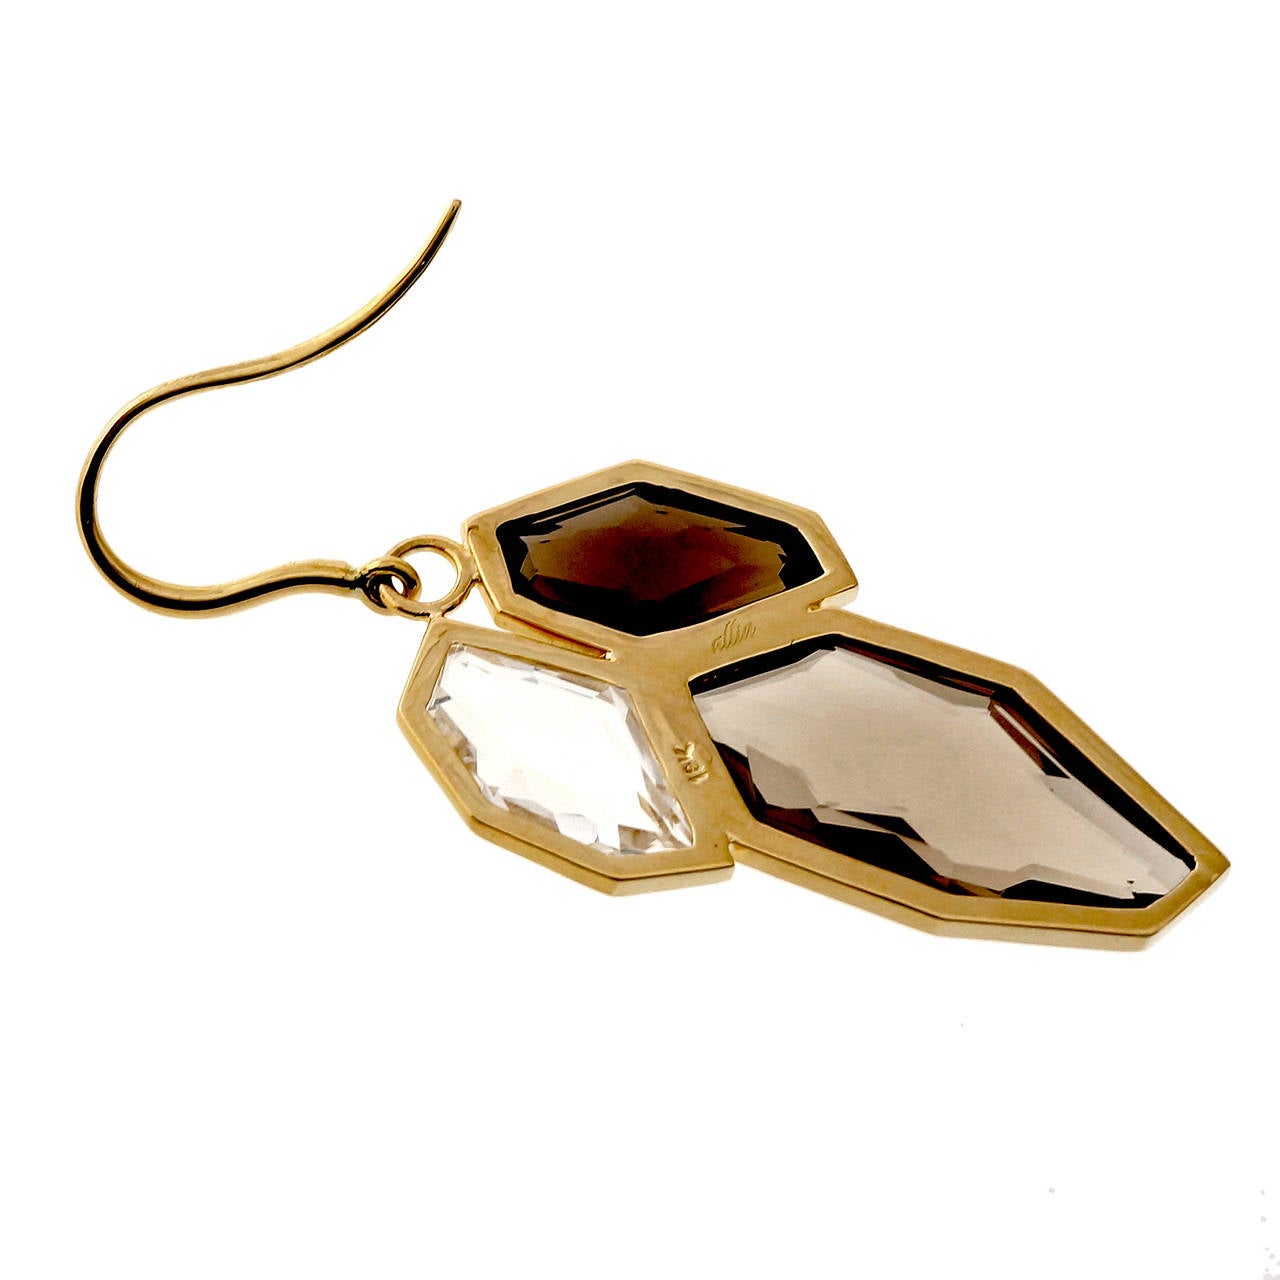 Handmade Allia designer smoky quartz dangle earrings with different shades of natural fantasy cut Quartz fitted into solid 18k yellow gold frames.

2 medium brown fantasy Quartz, approx. total weight 3.30cts, VS, 20.47 x 8.52 x 5.40mm
2 dark brown